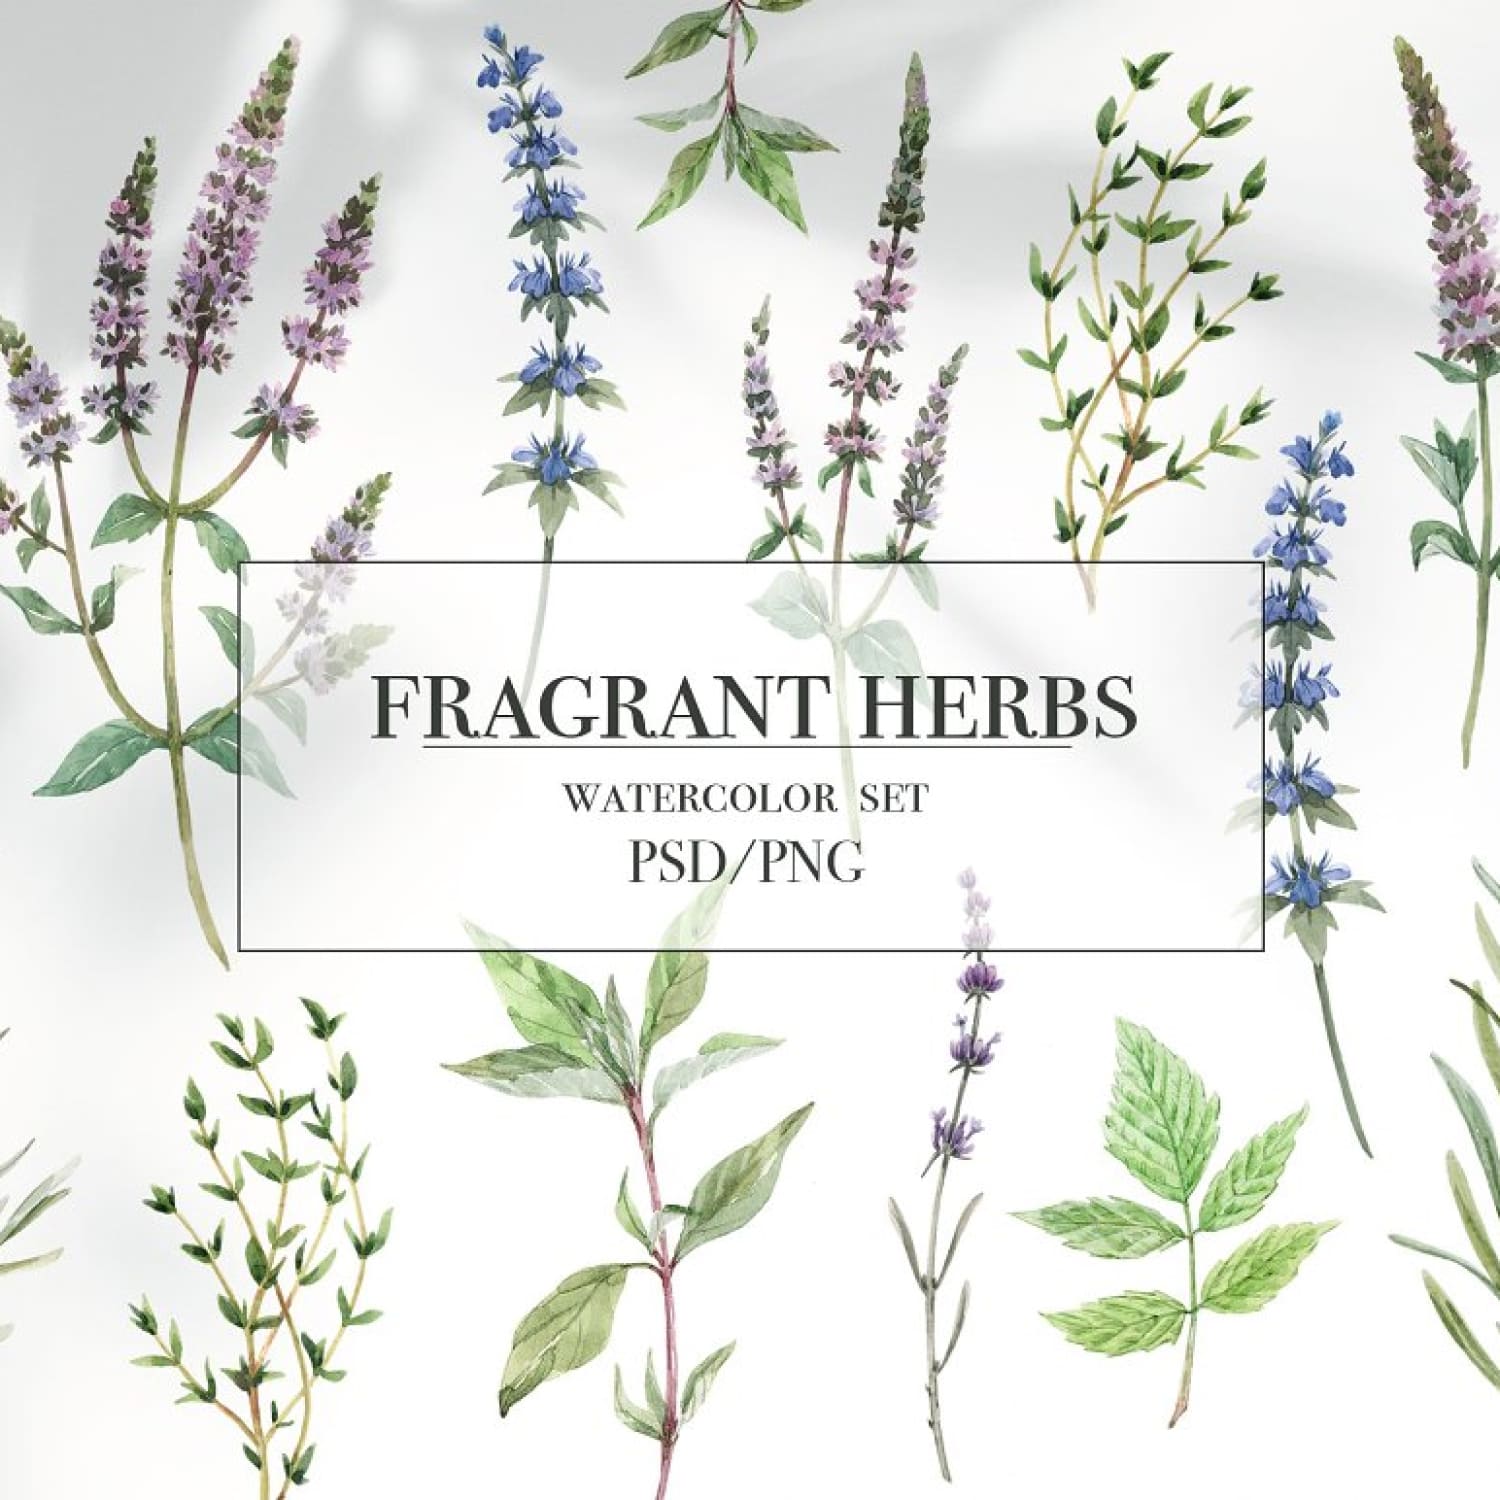 Fragrant Herbs Set. Watercolor Flower cover image.